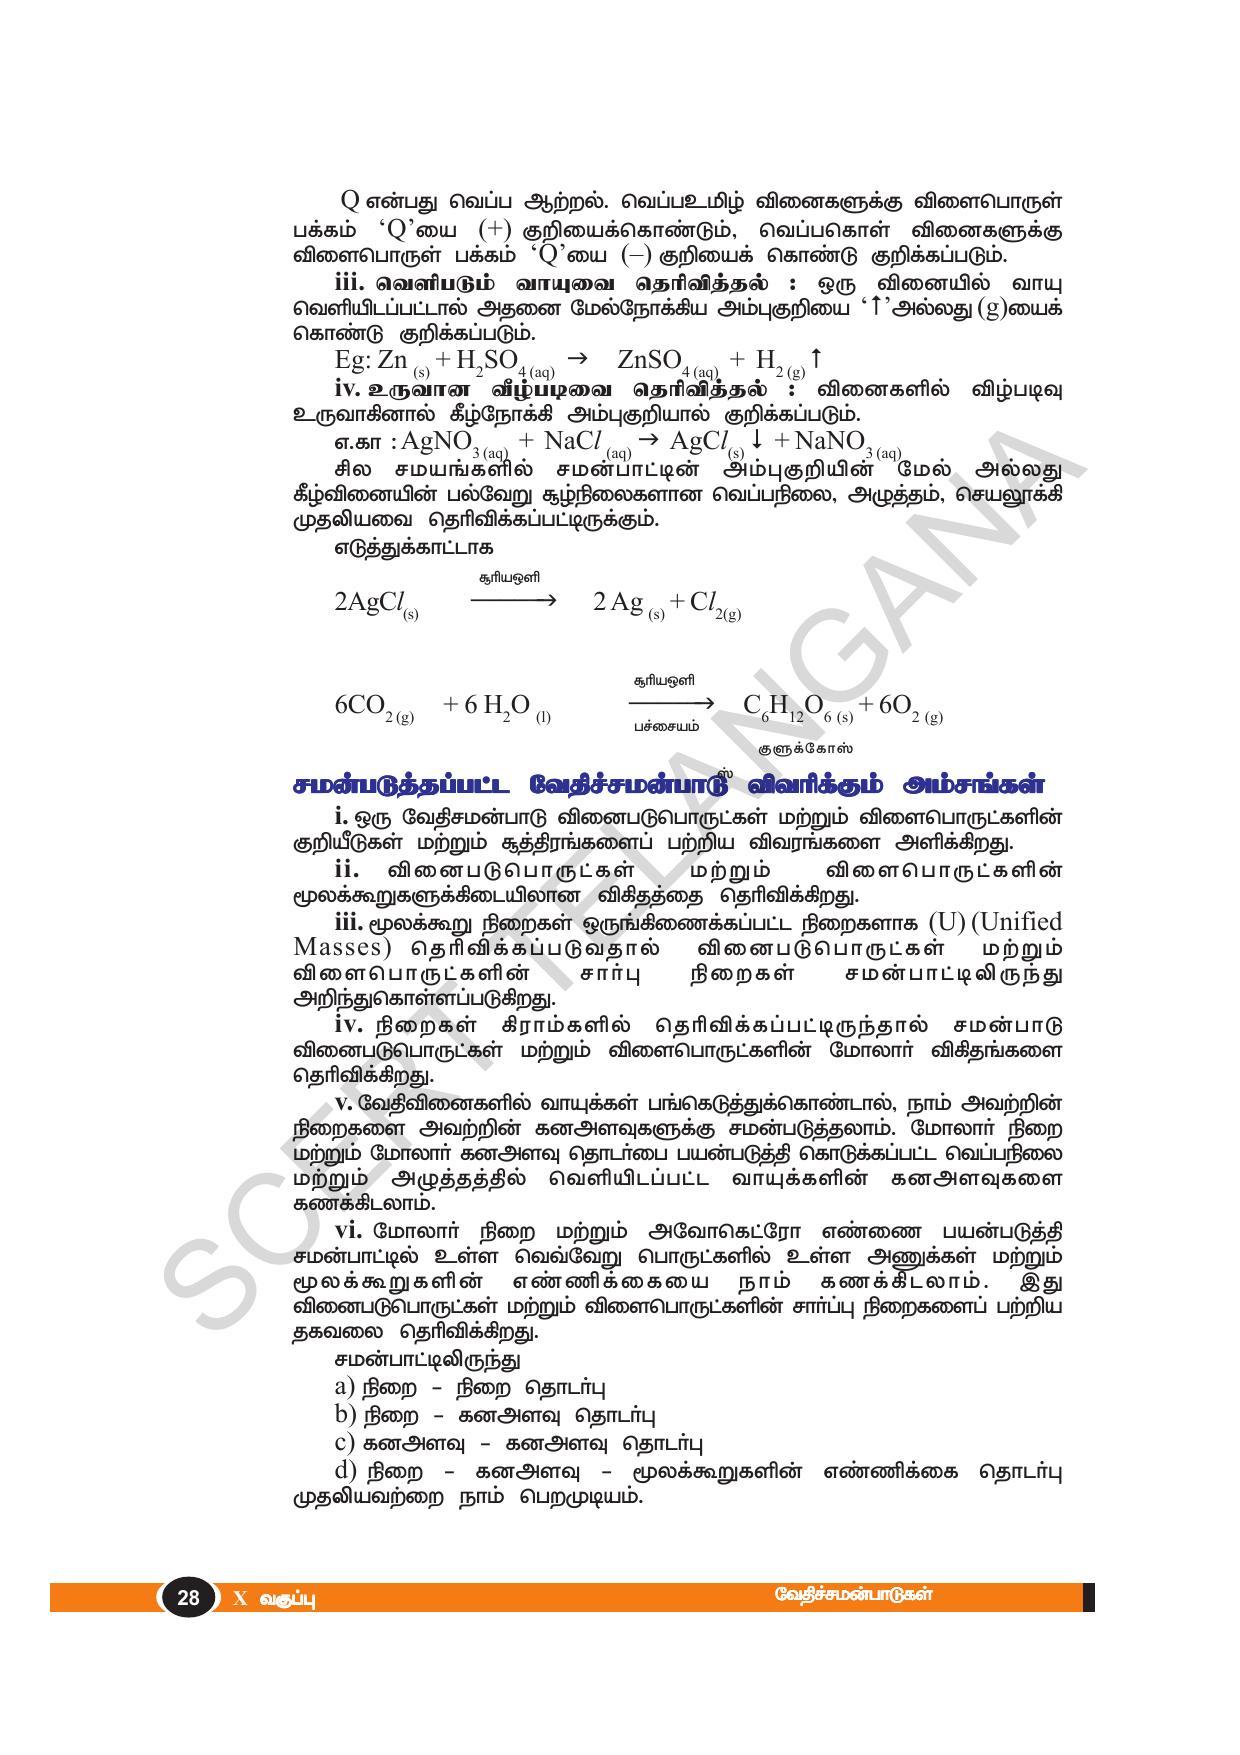 TS SCERT Class 10 Physical Science(Tamil Medium) Text Book - Page 40